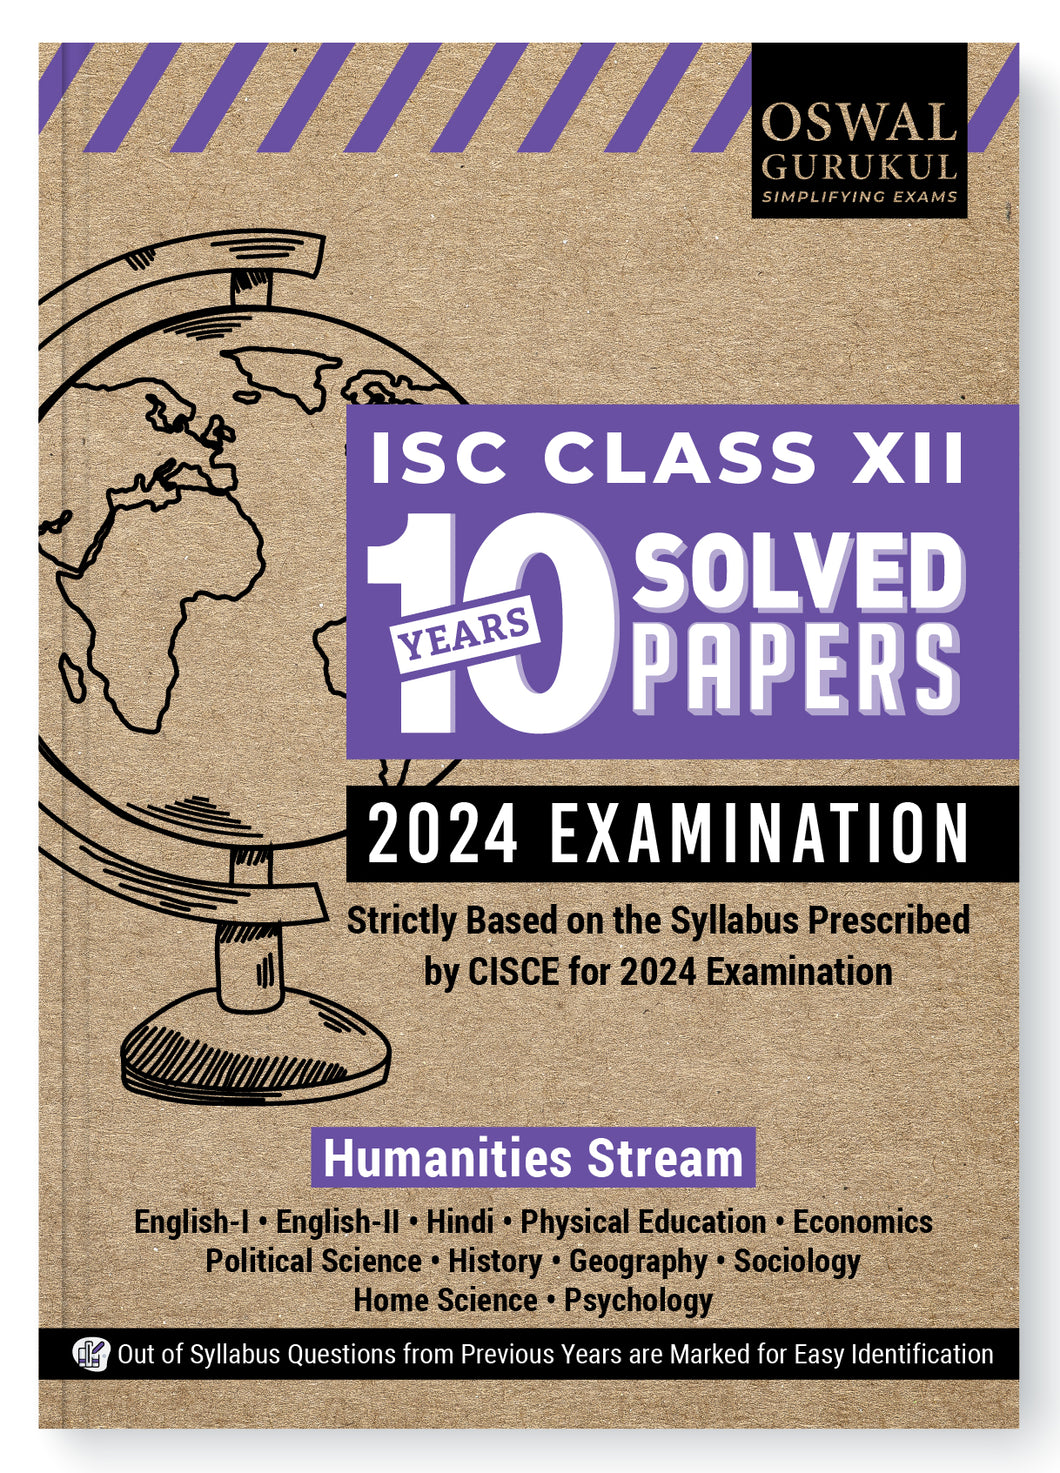 Oswal - Gurukul Humanities Stream 10 Years Solved Papers : ISC 12 for Exam 2023